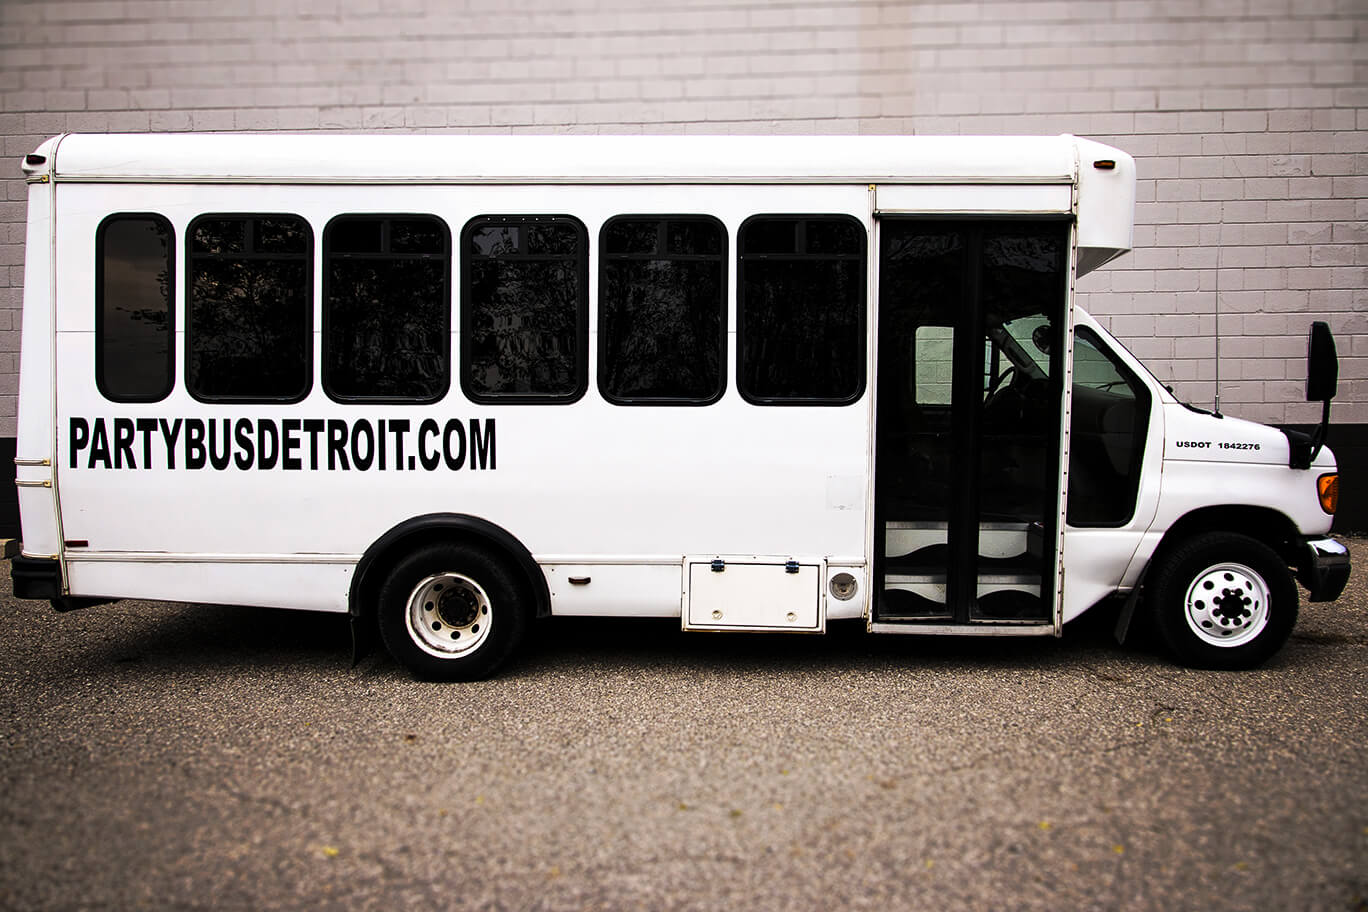 sioux falls Party bus with perimeter seating